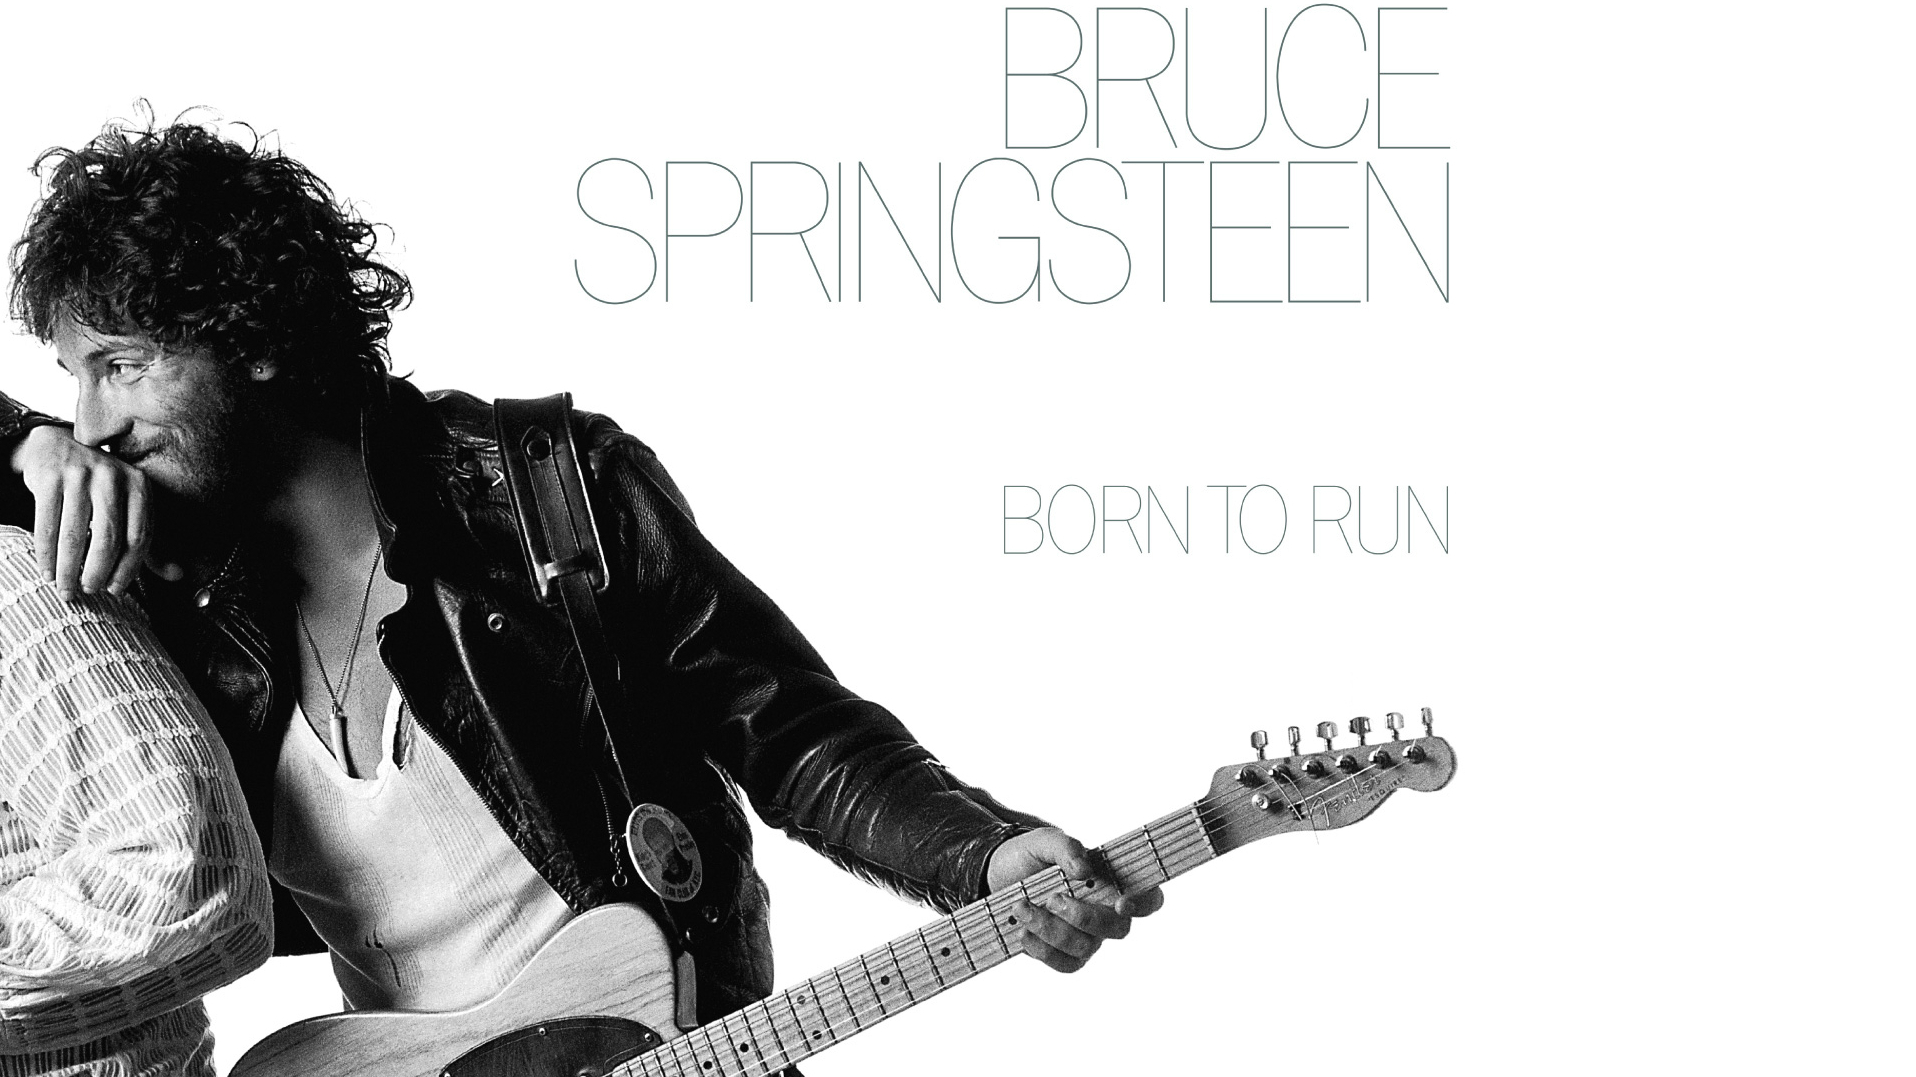 The story behind Bruce Springsteen's Born To Run album artwork